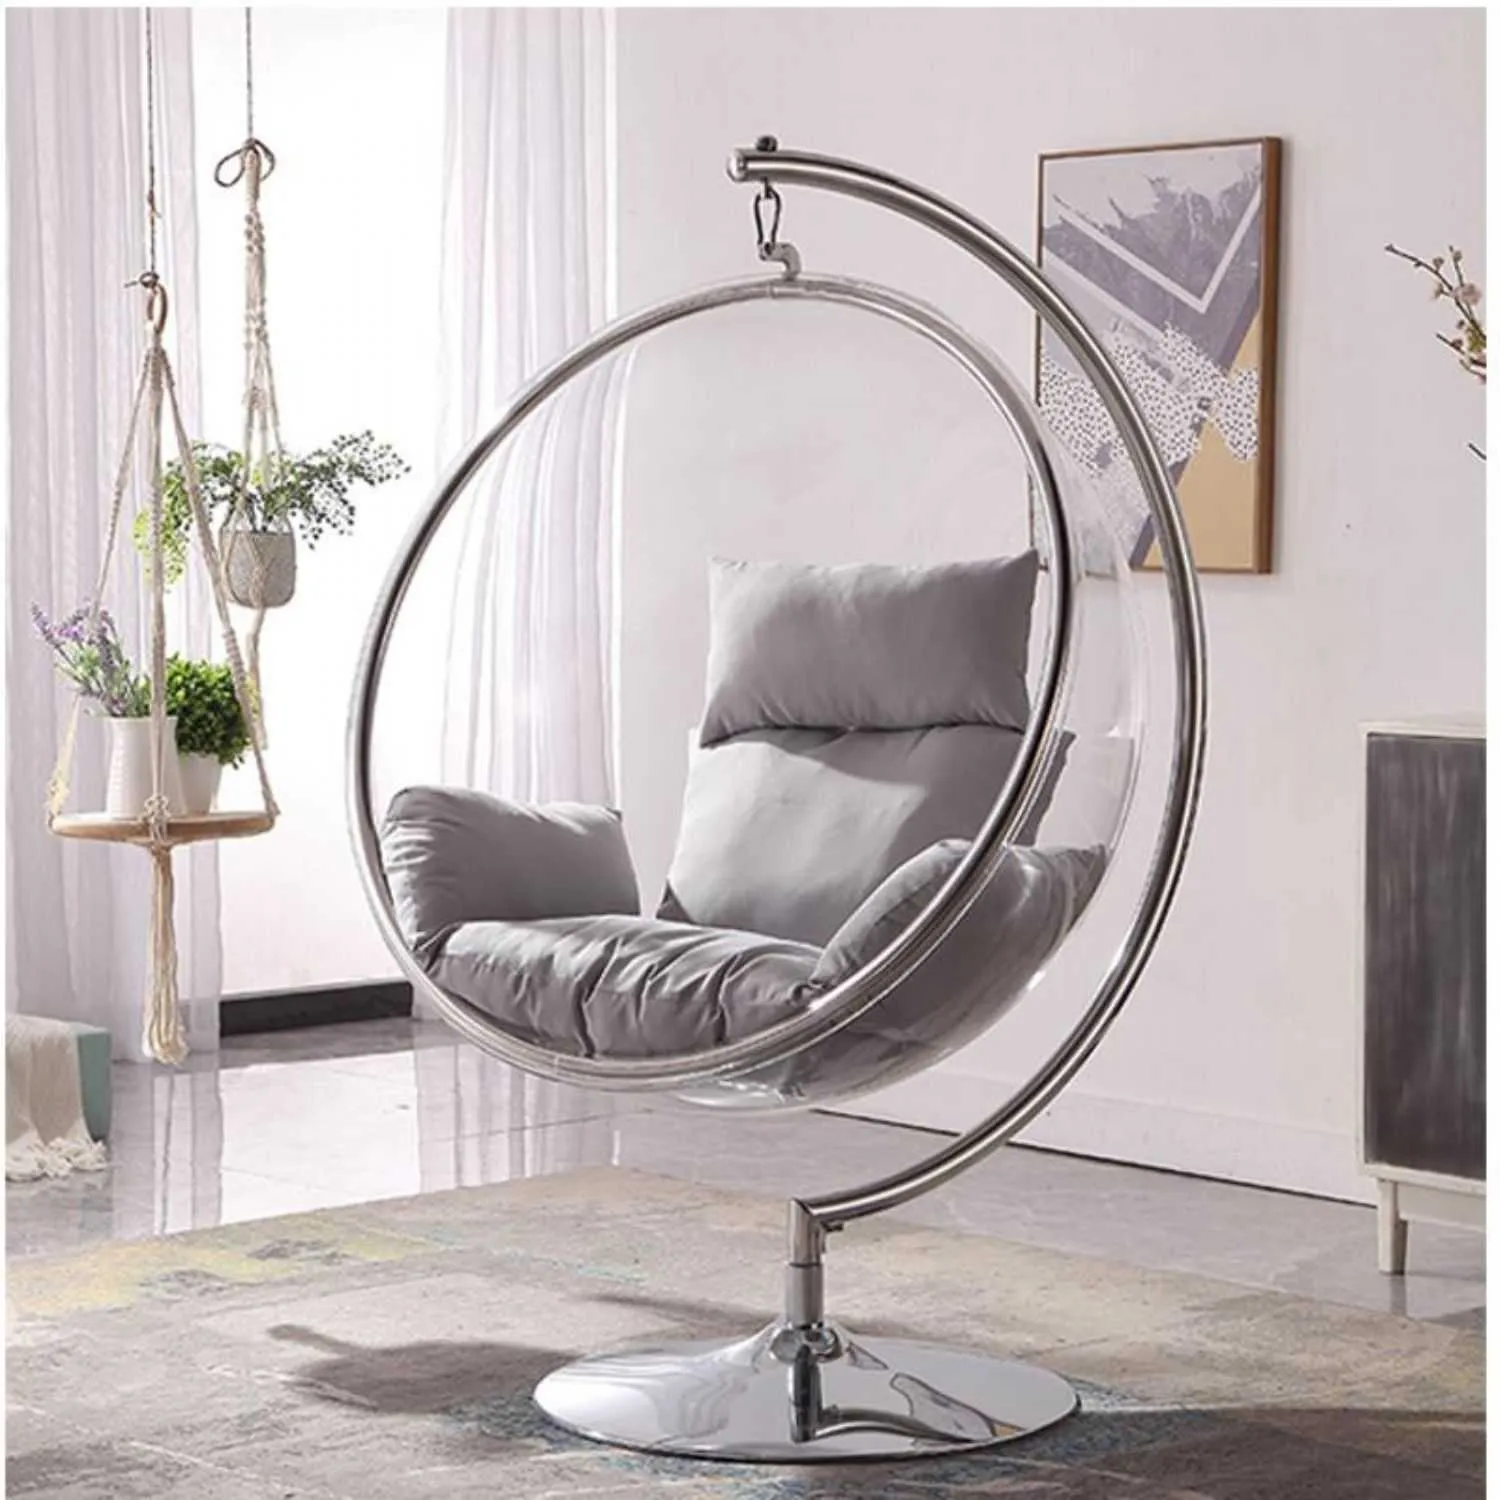 Clear Round Retro Hanging Bubble Chair On Steel Base with Grey Cushion